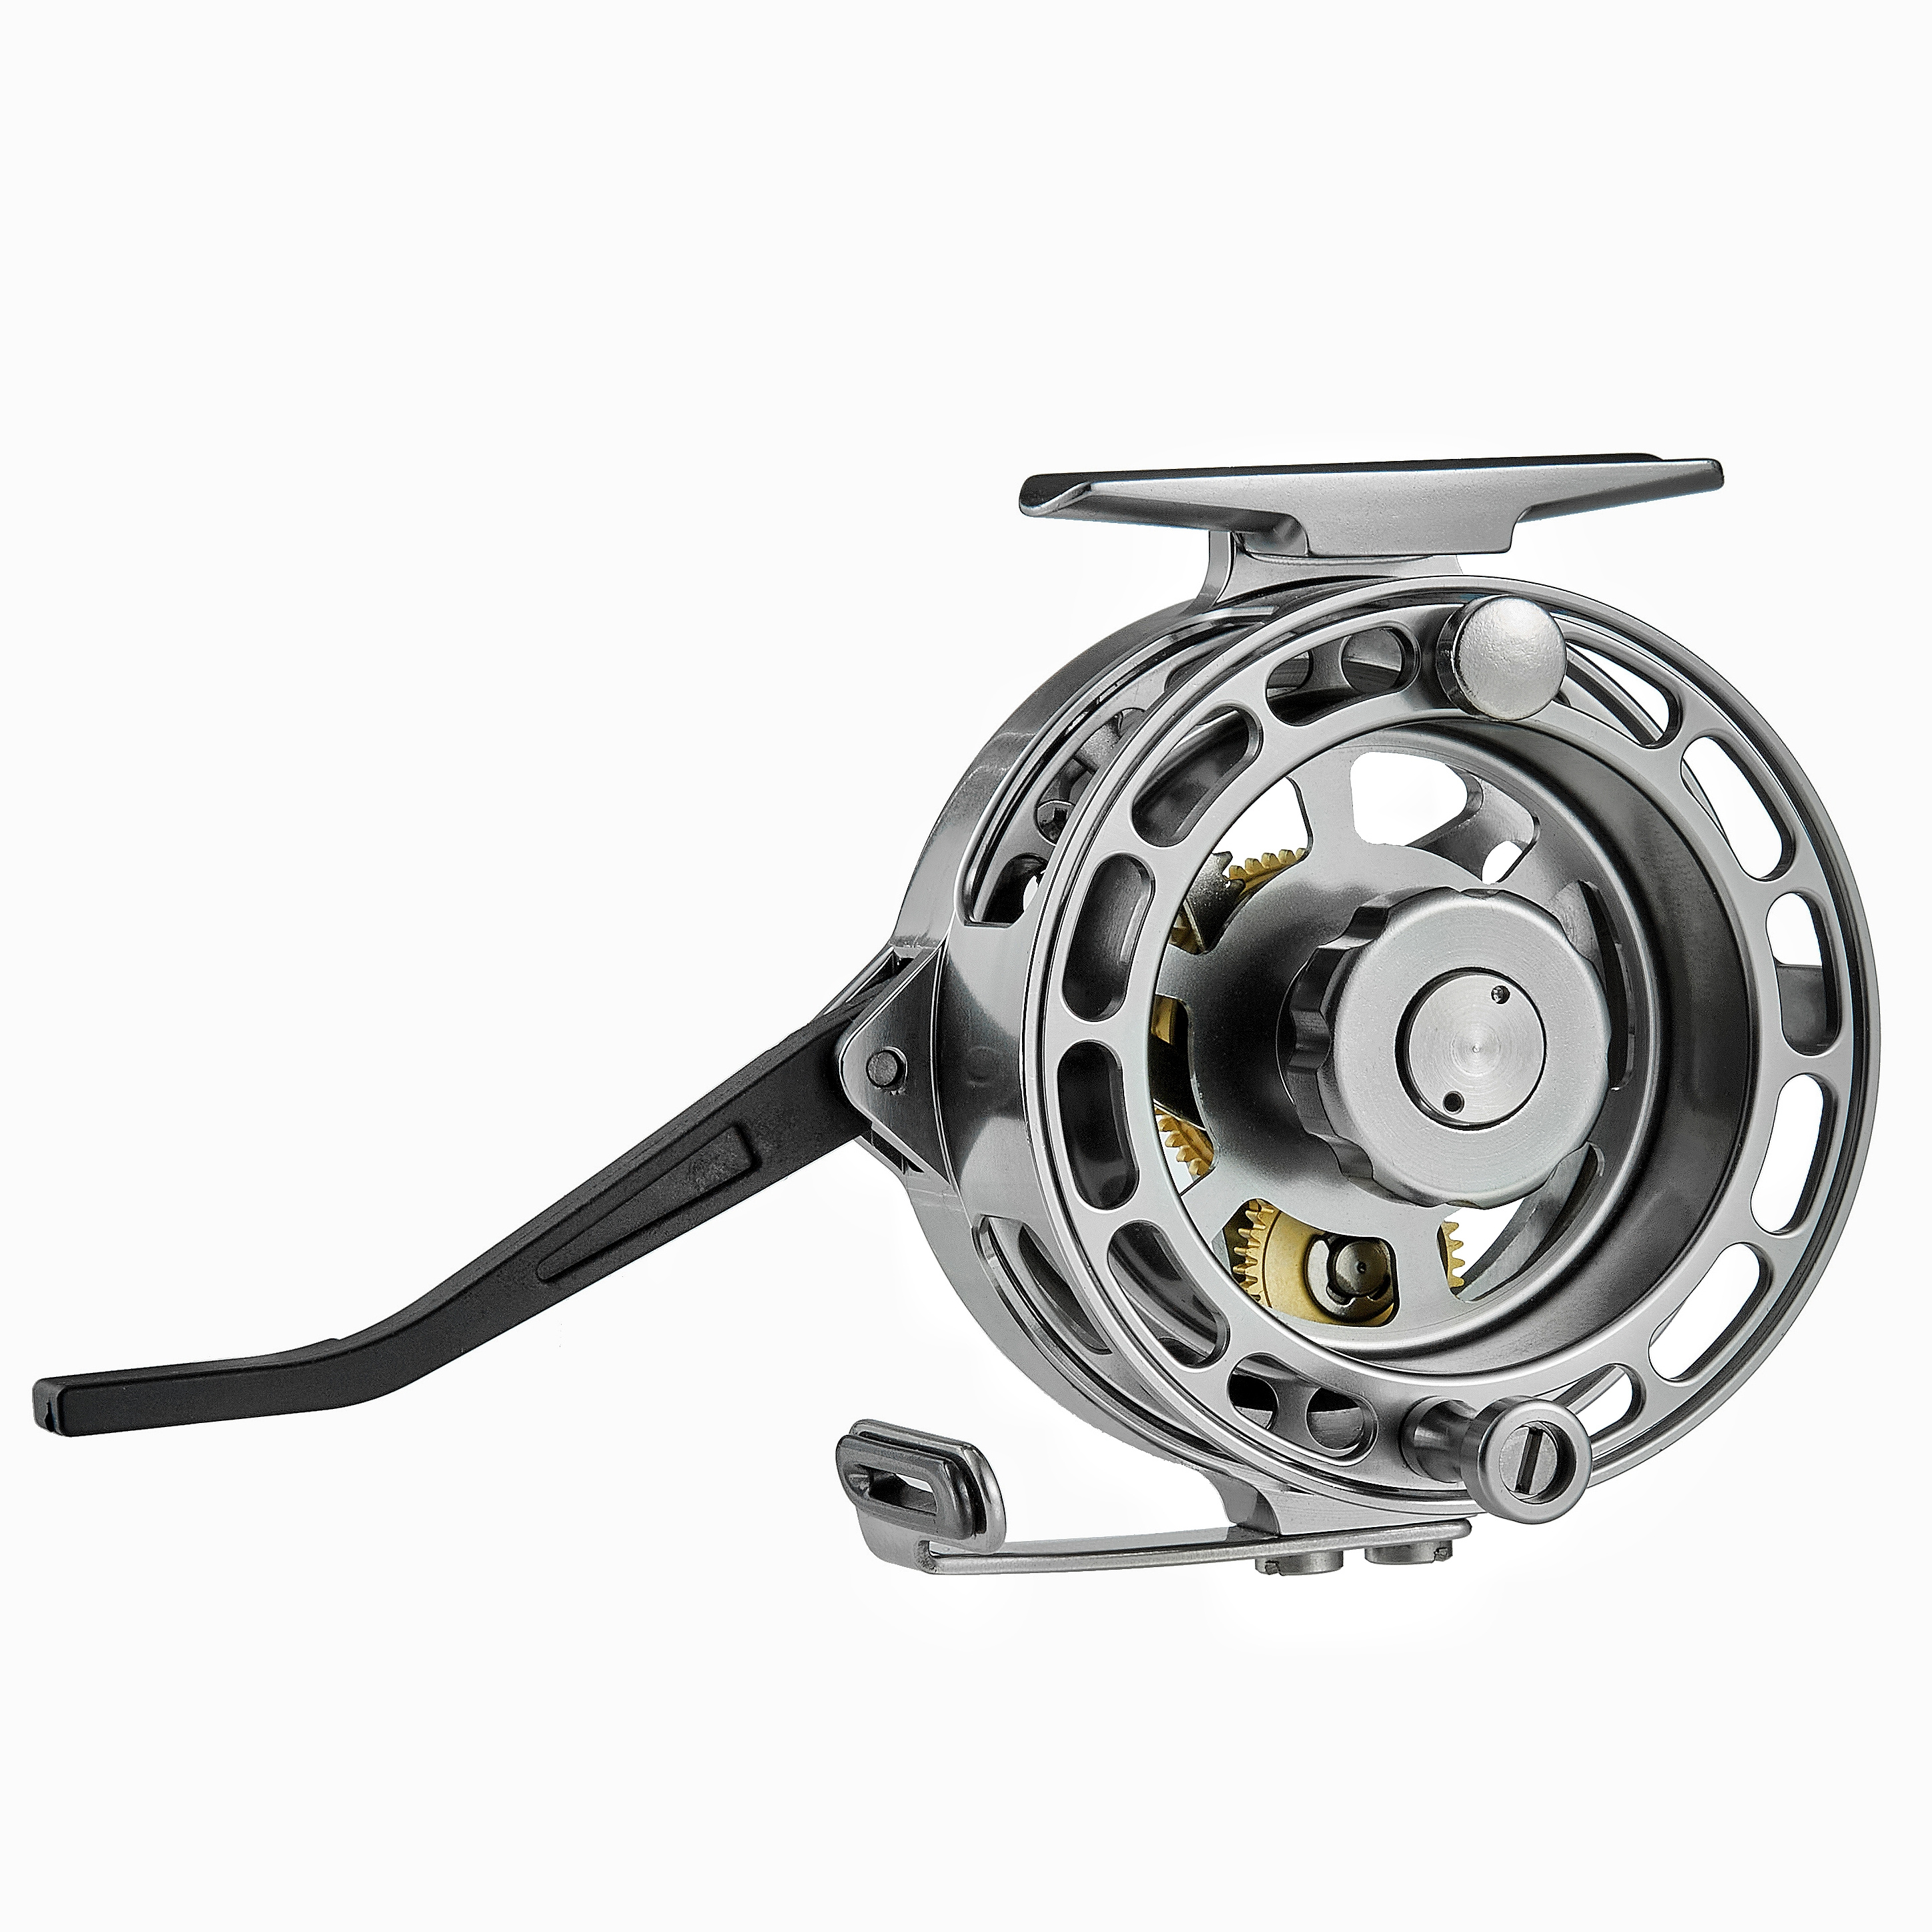 Funpesca Portable Aluminum Fly Fishing Reel - Lightweight and Durable Reel  for Bass, Trout, Freshwater and Saltwater Fishing